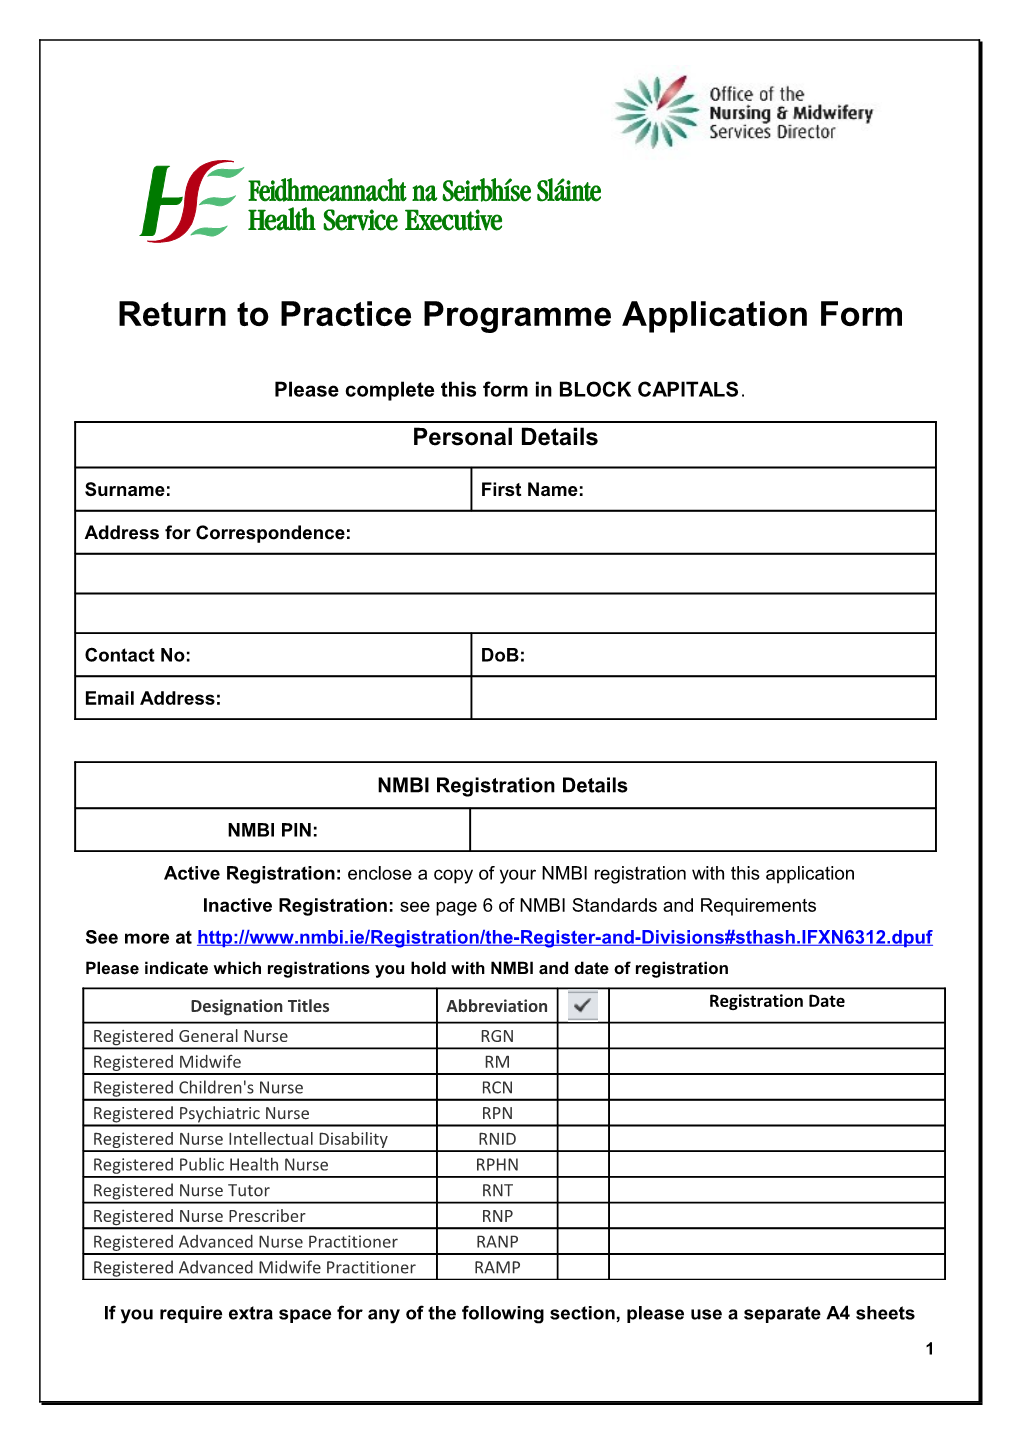 Return to Practice Programme Application Form